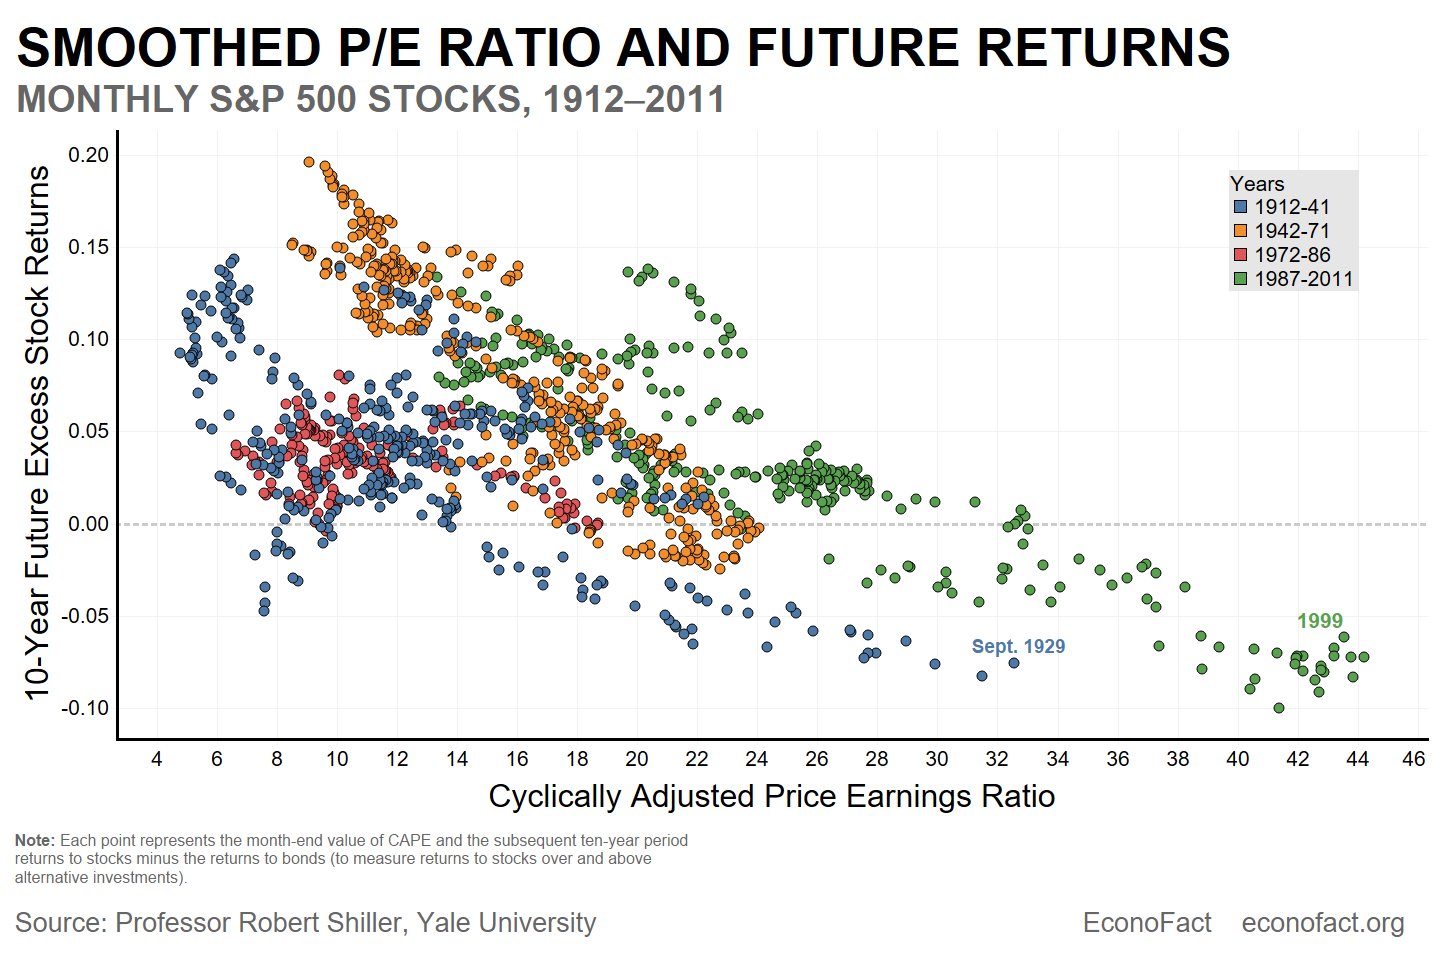 Smoothed P/E ratio and future returns of monthly S&P 500 Stocks from 1912 to 2012. Each point represents the month-end value of CAPE and subsequent ten-year period returns to stocks minus the returns to bonds (to measure returns to stock over and above alternative investments). There is a rough downward trend throughout, especially in points grouped by specific year ranges (e.g. 1912-41).